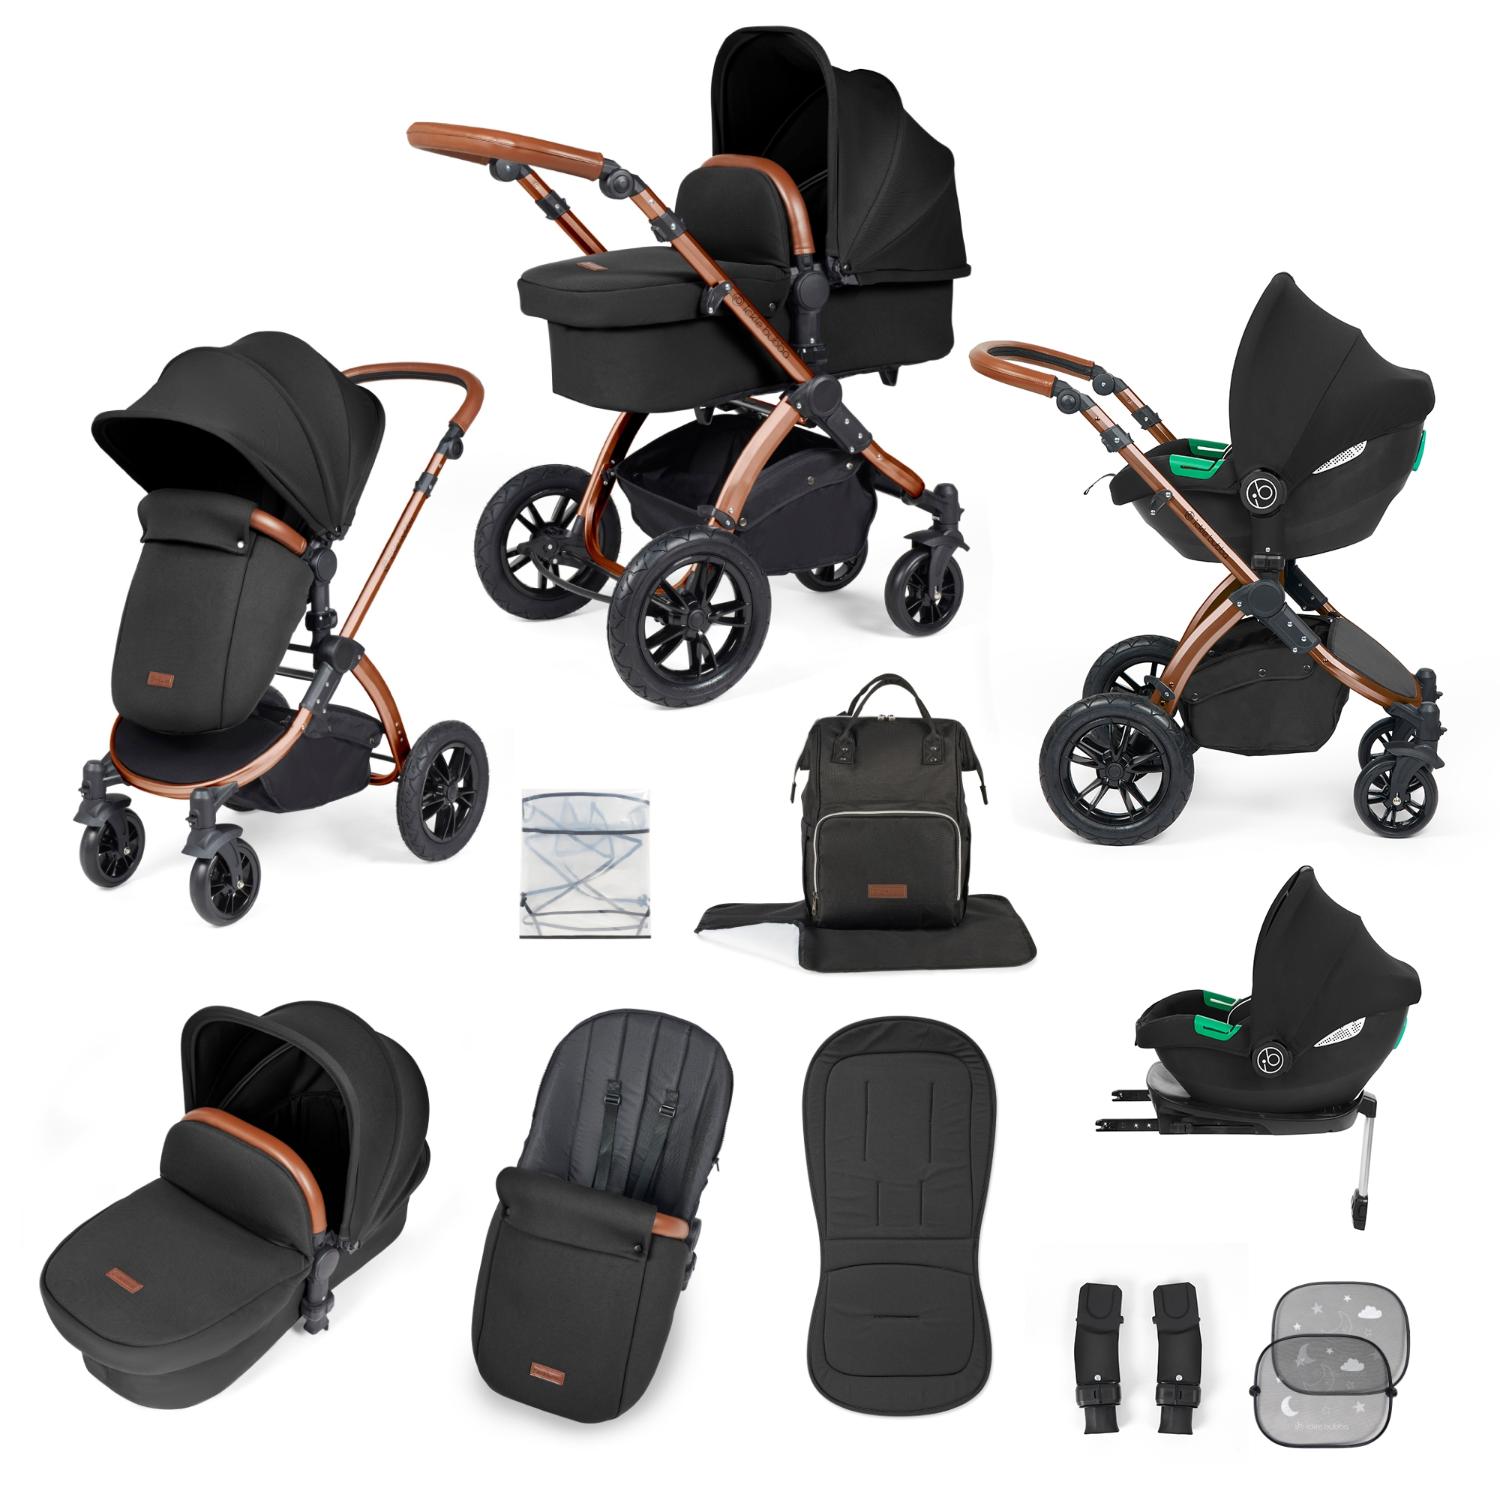 Ickle Bubba Stomp Luxe All-in-One Travel System with Cirrus i-Size Car Seat and ISOFIX Base and accessories in Midnight black colour with bronze chassis and tan handle